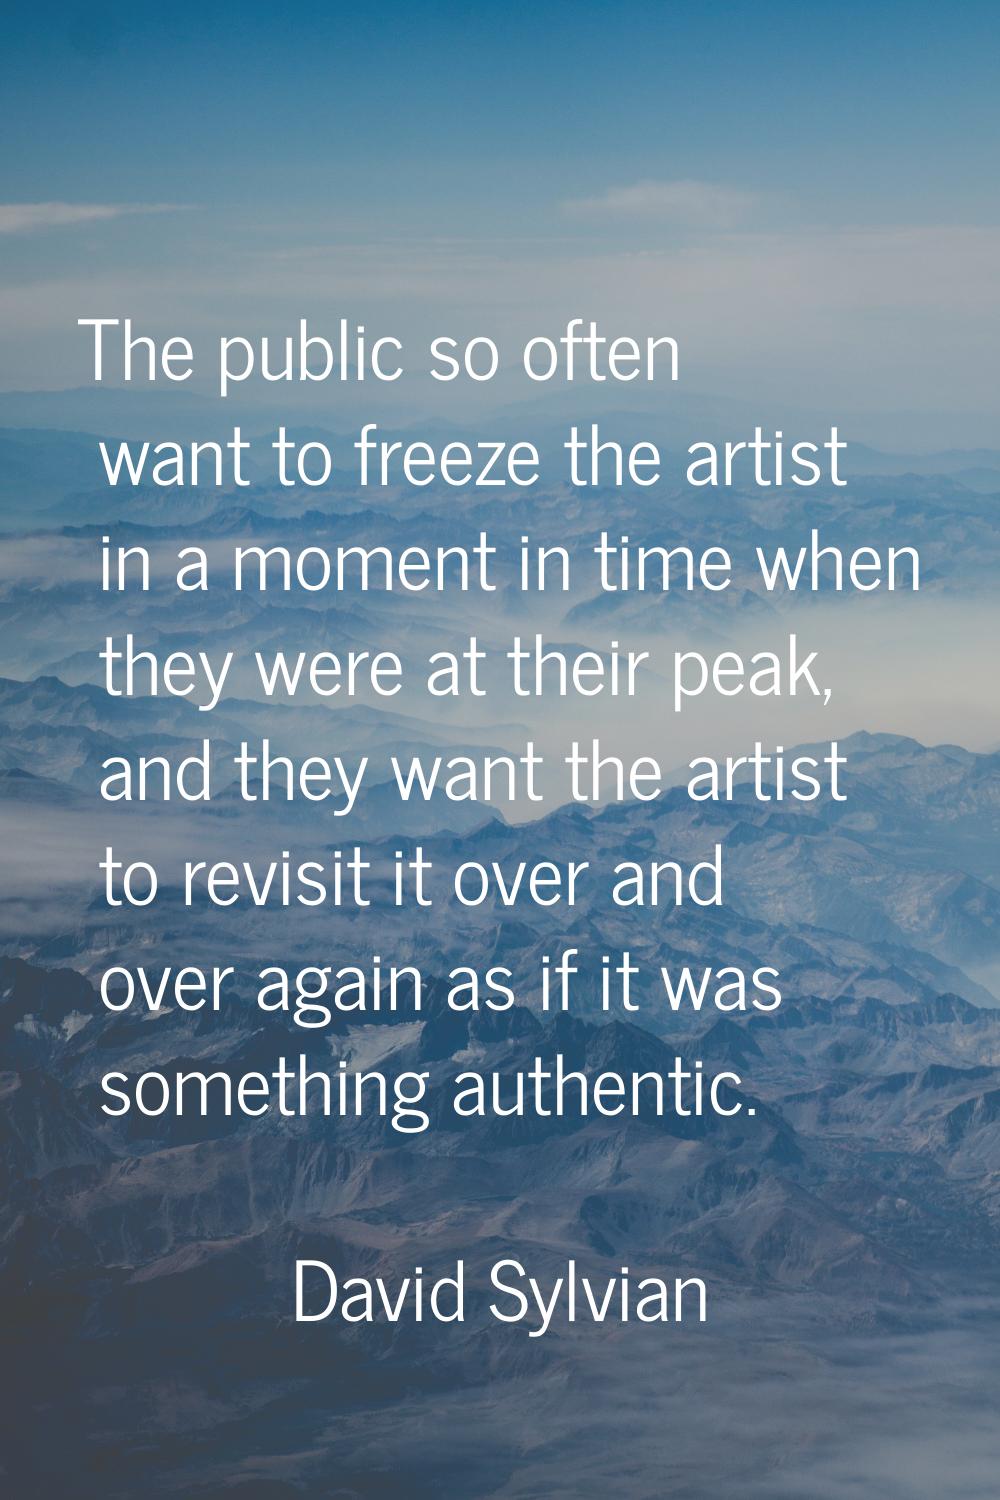 The public so often want to freeze the artist in a moment in time when they were at their peak, and